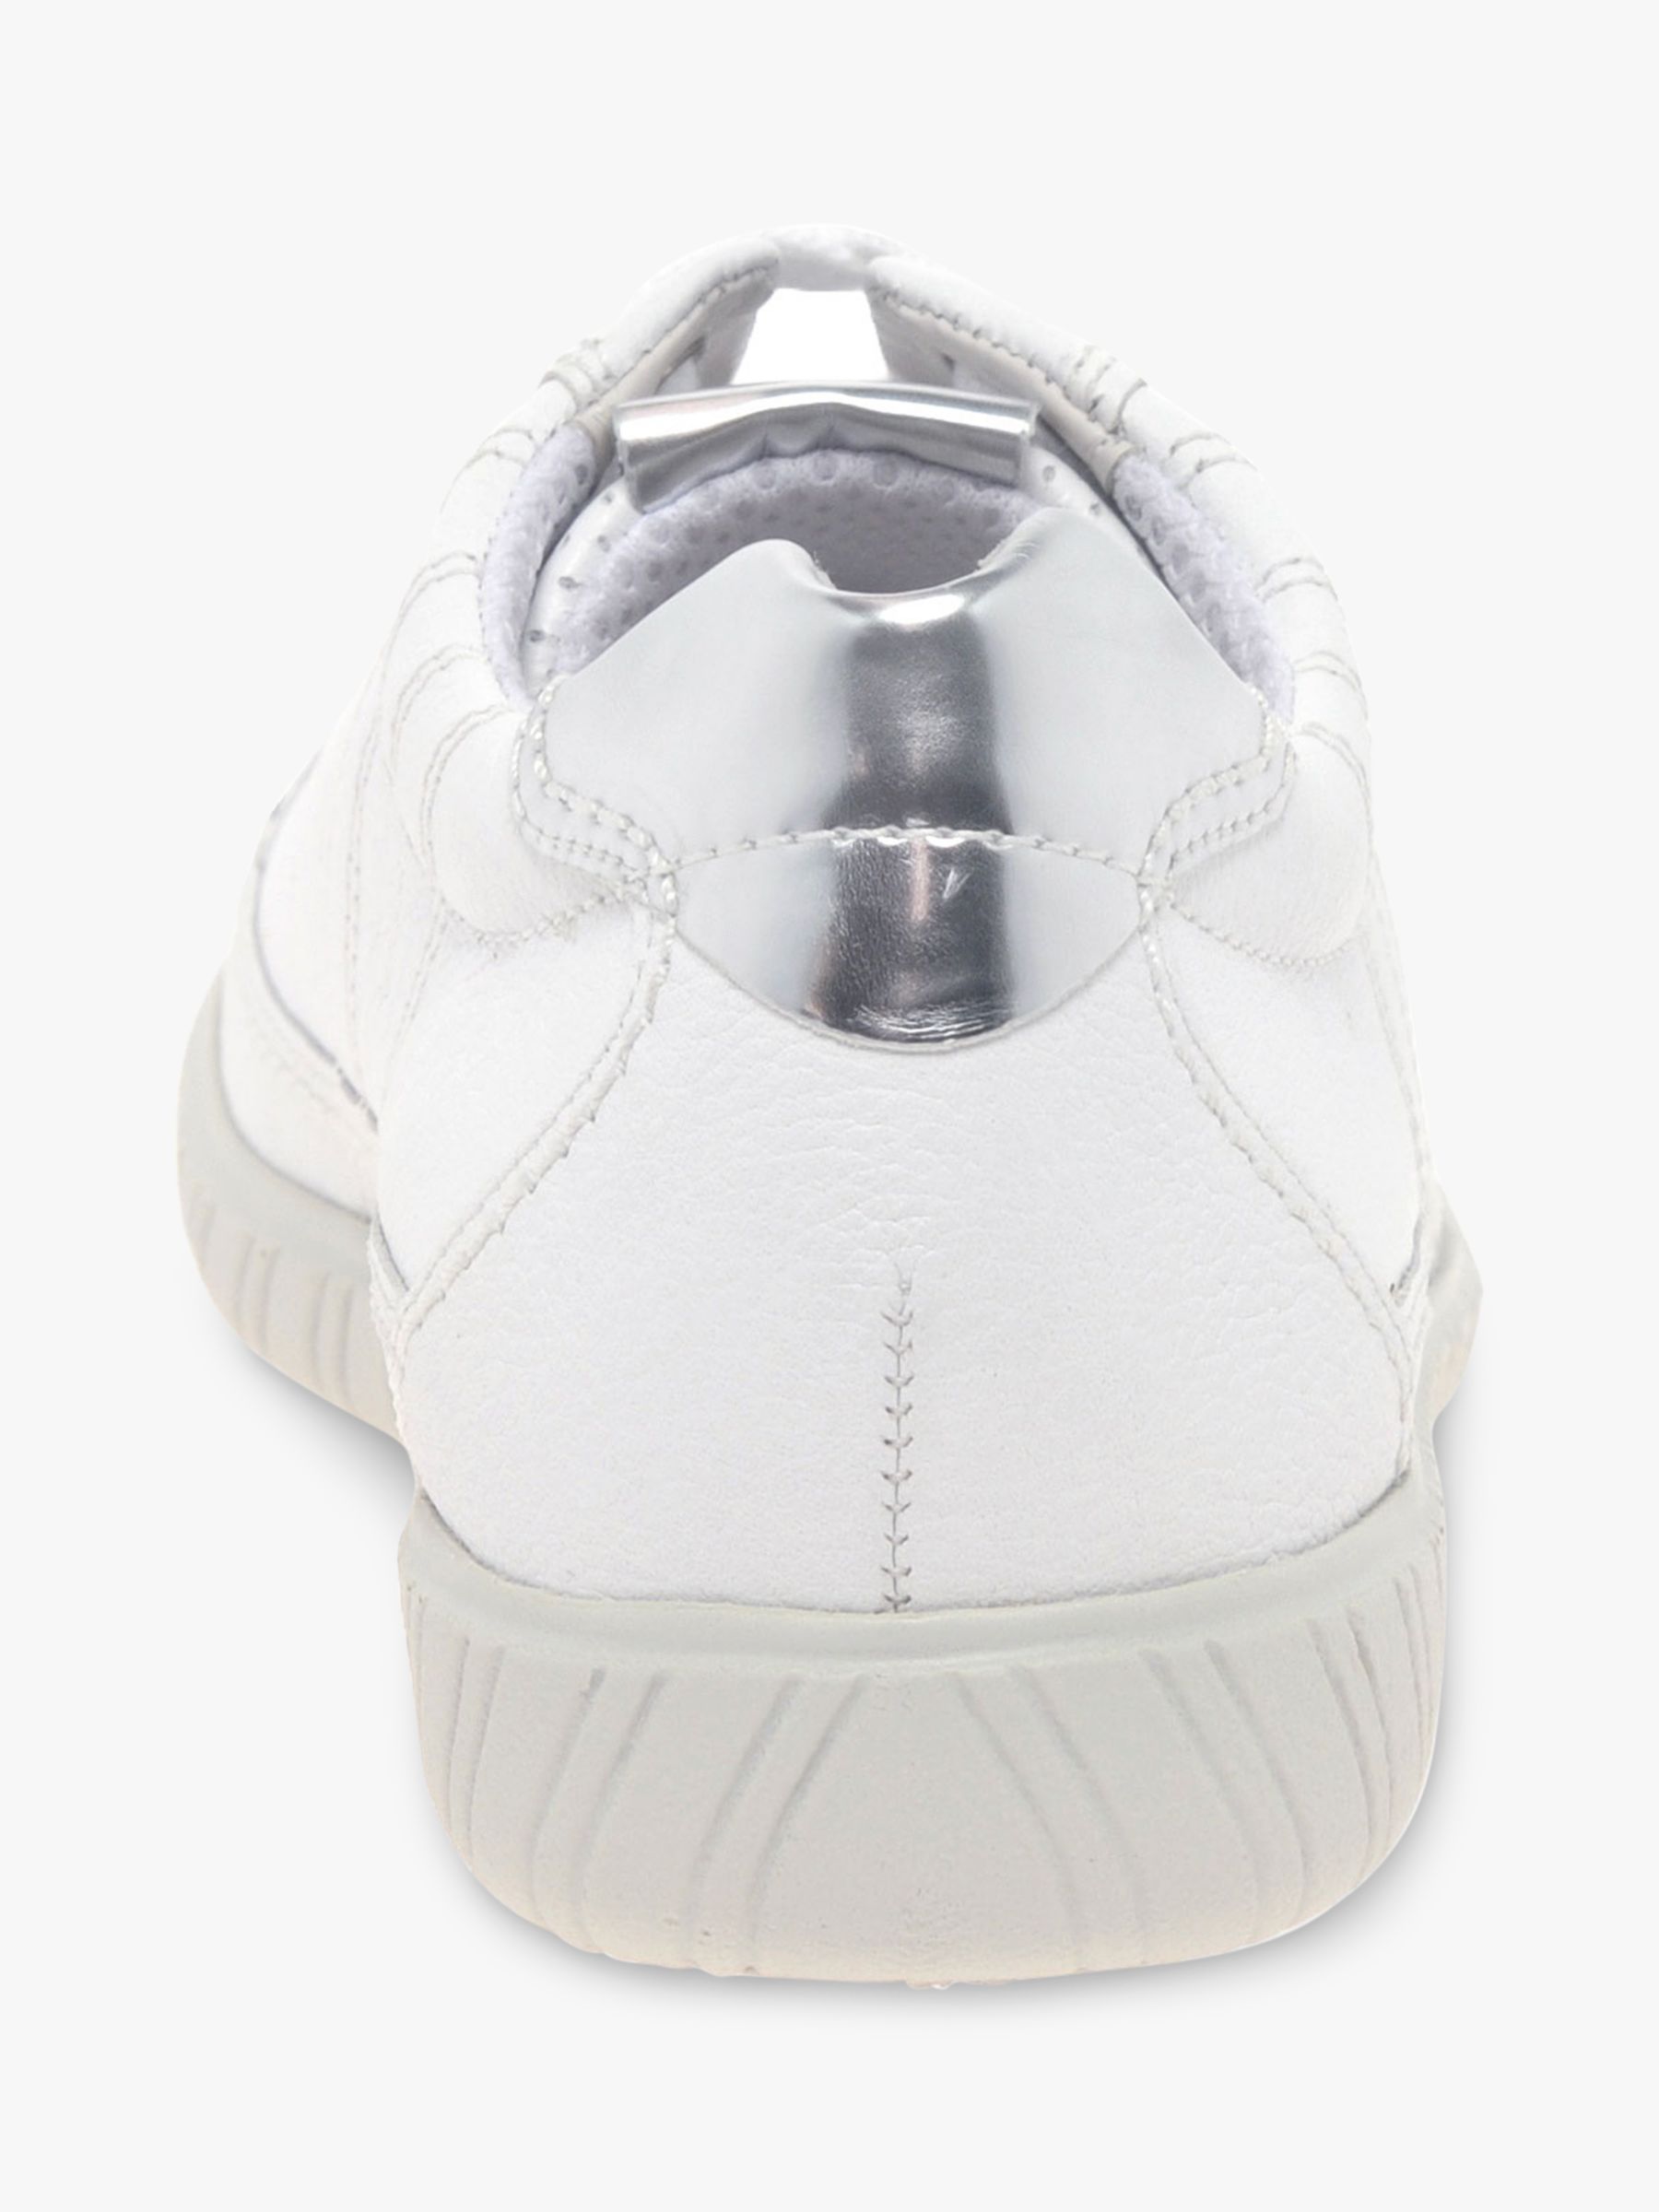 Buy Gabor Amulet Wide Fit Leather Trainers, White Online at johnlewis.com